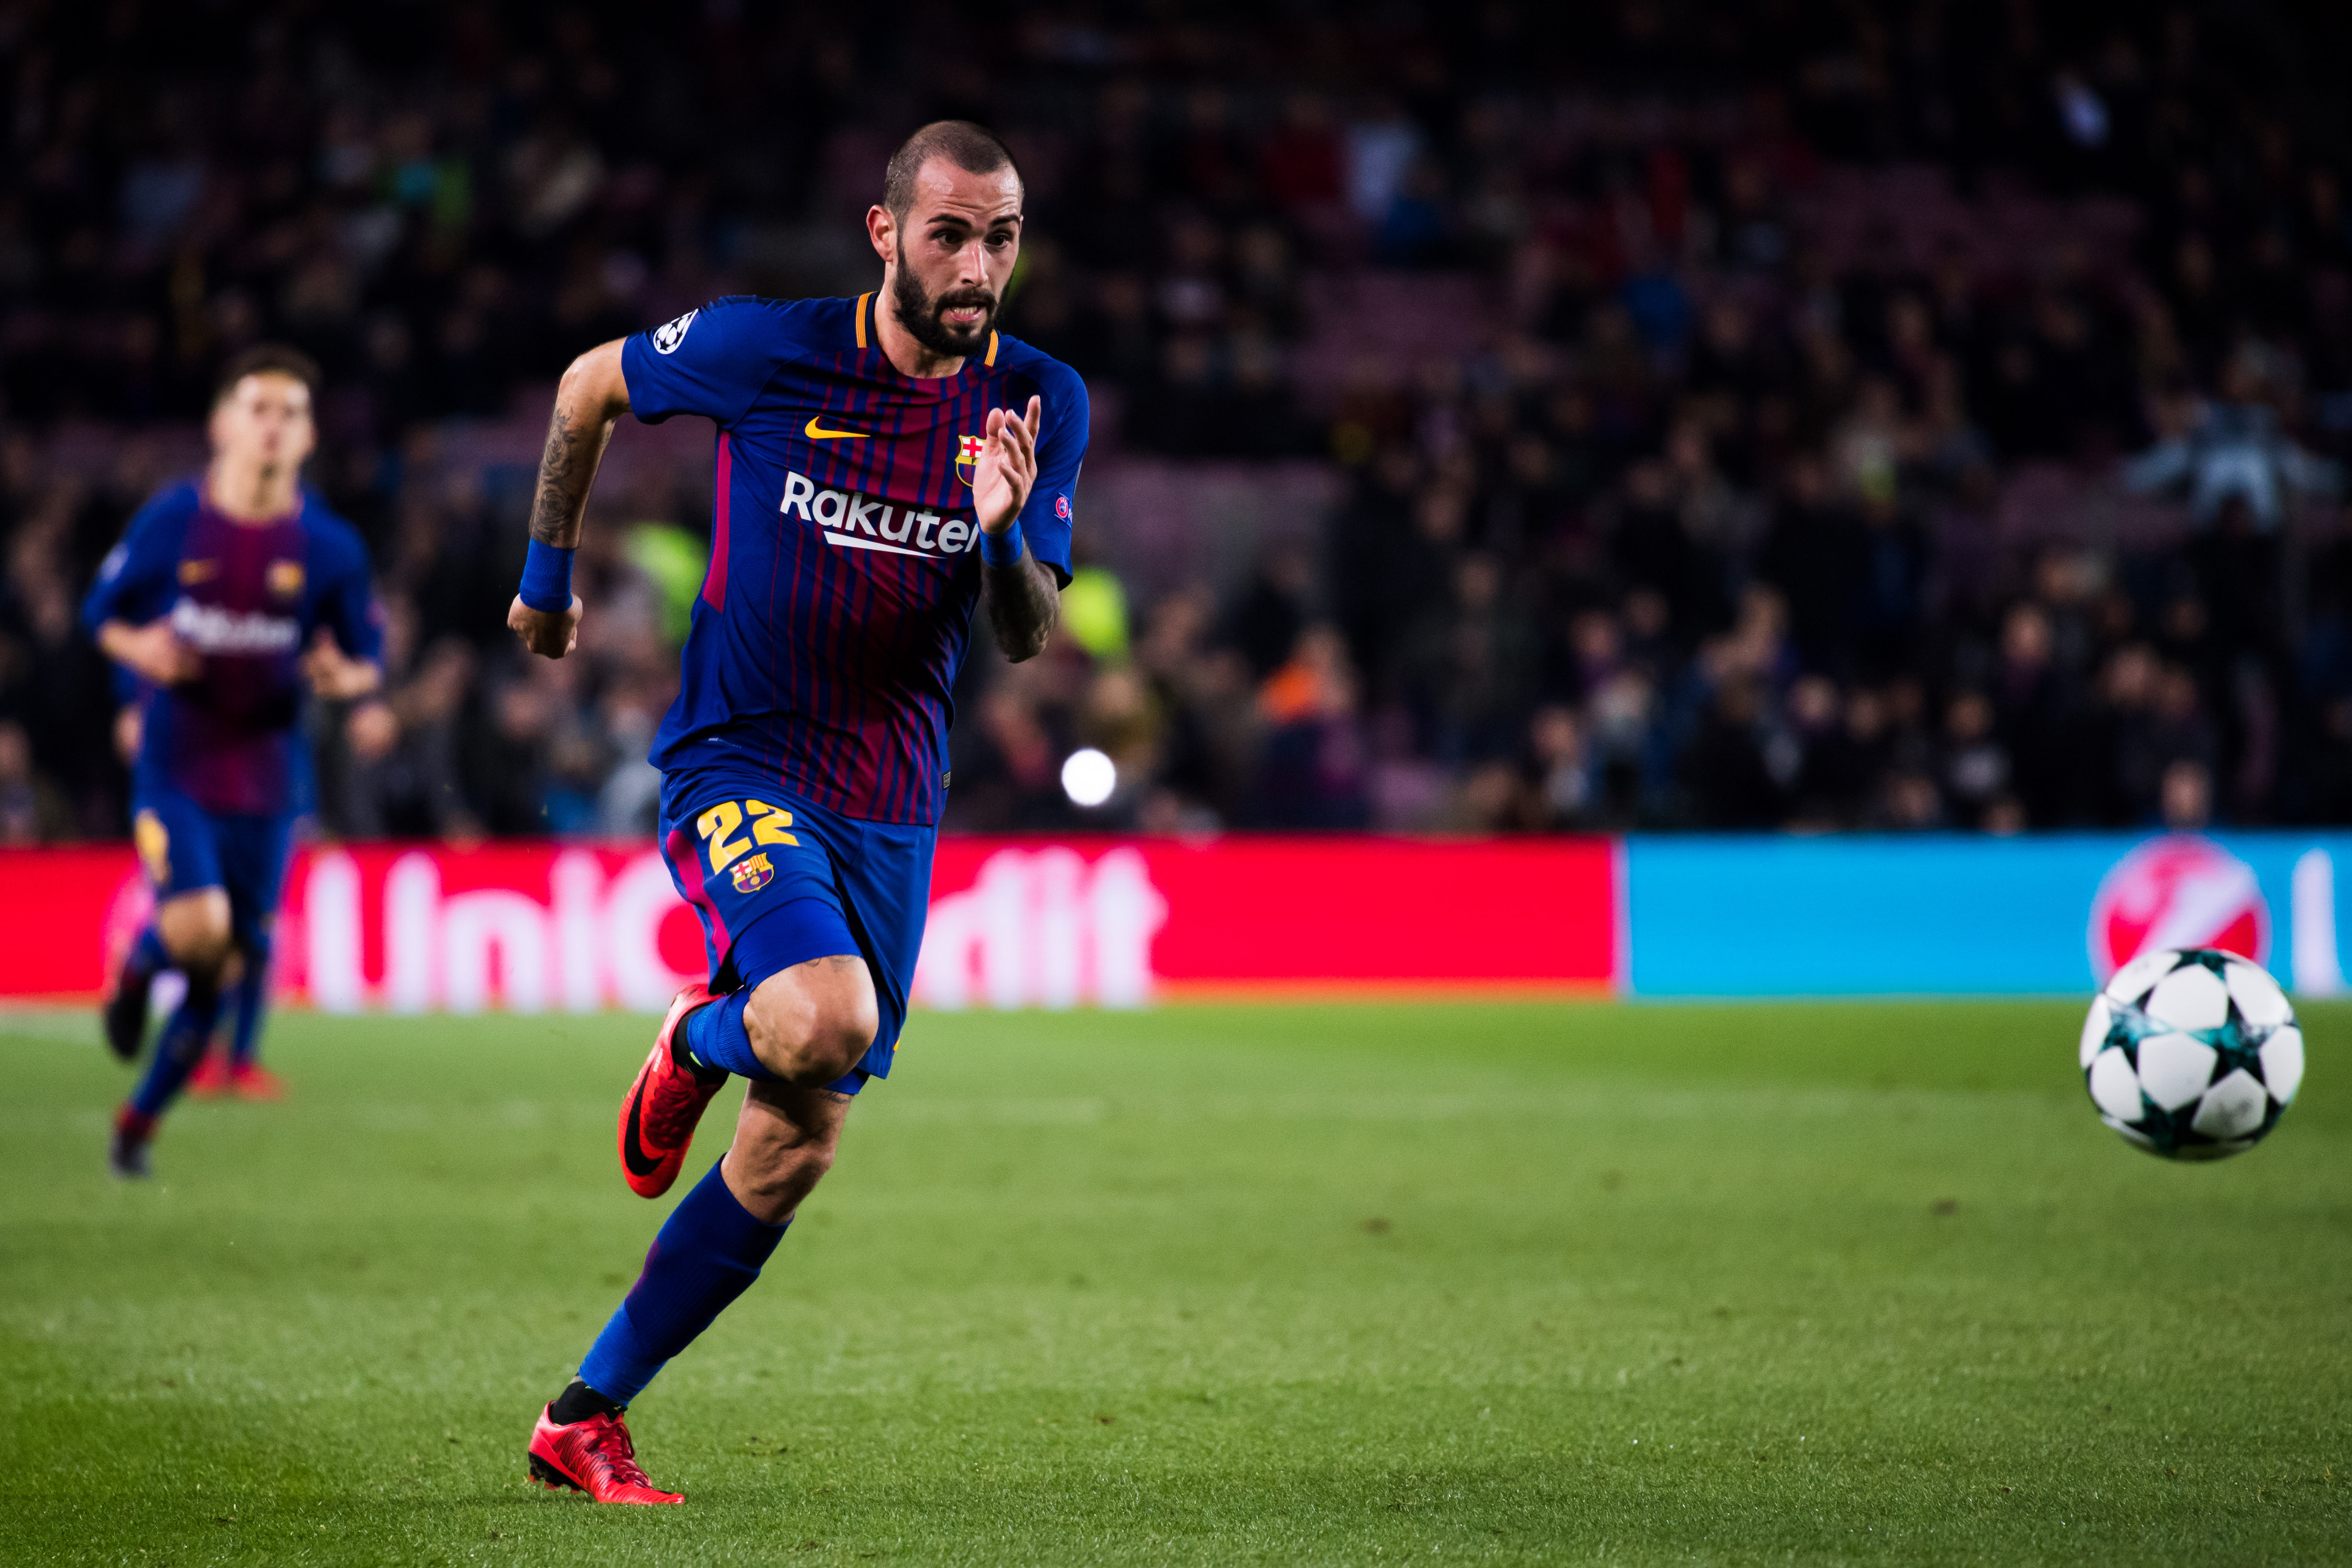 BARCELONA, SPAIN - DECEMBER 05:  Aleix Vidal of FC Barcelona runs for the ball during the UEFA Champions League group D match between FC Barcelona and Sporting CP at Camp Nou on December 5, 2017 in Barcelona, Spain.  (Photo by Alex Caparros/Getty Images)